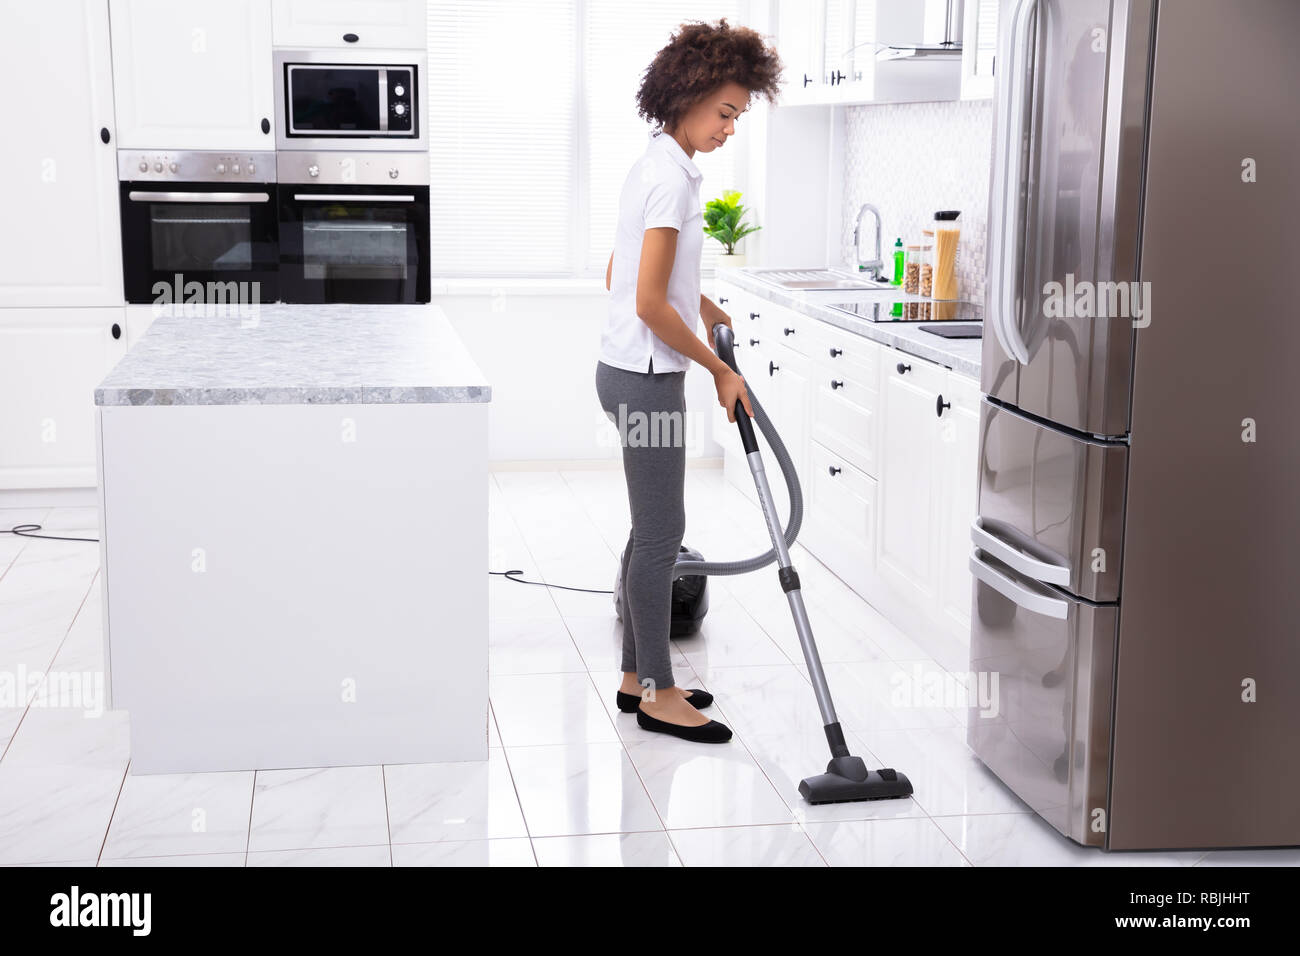 Close Up Of A Young Woman Cleaning The White Kitchen Floor With